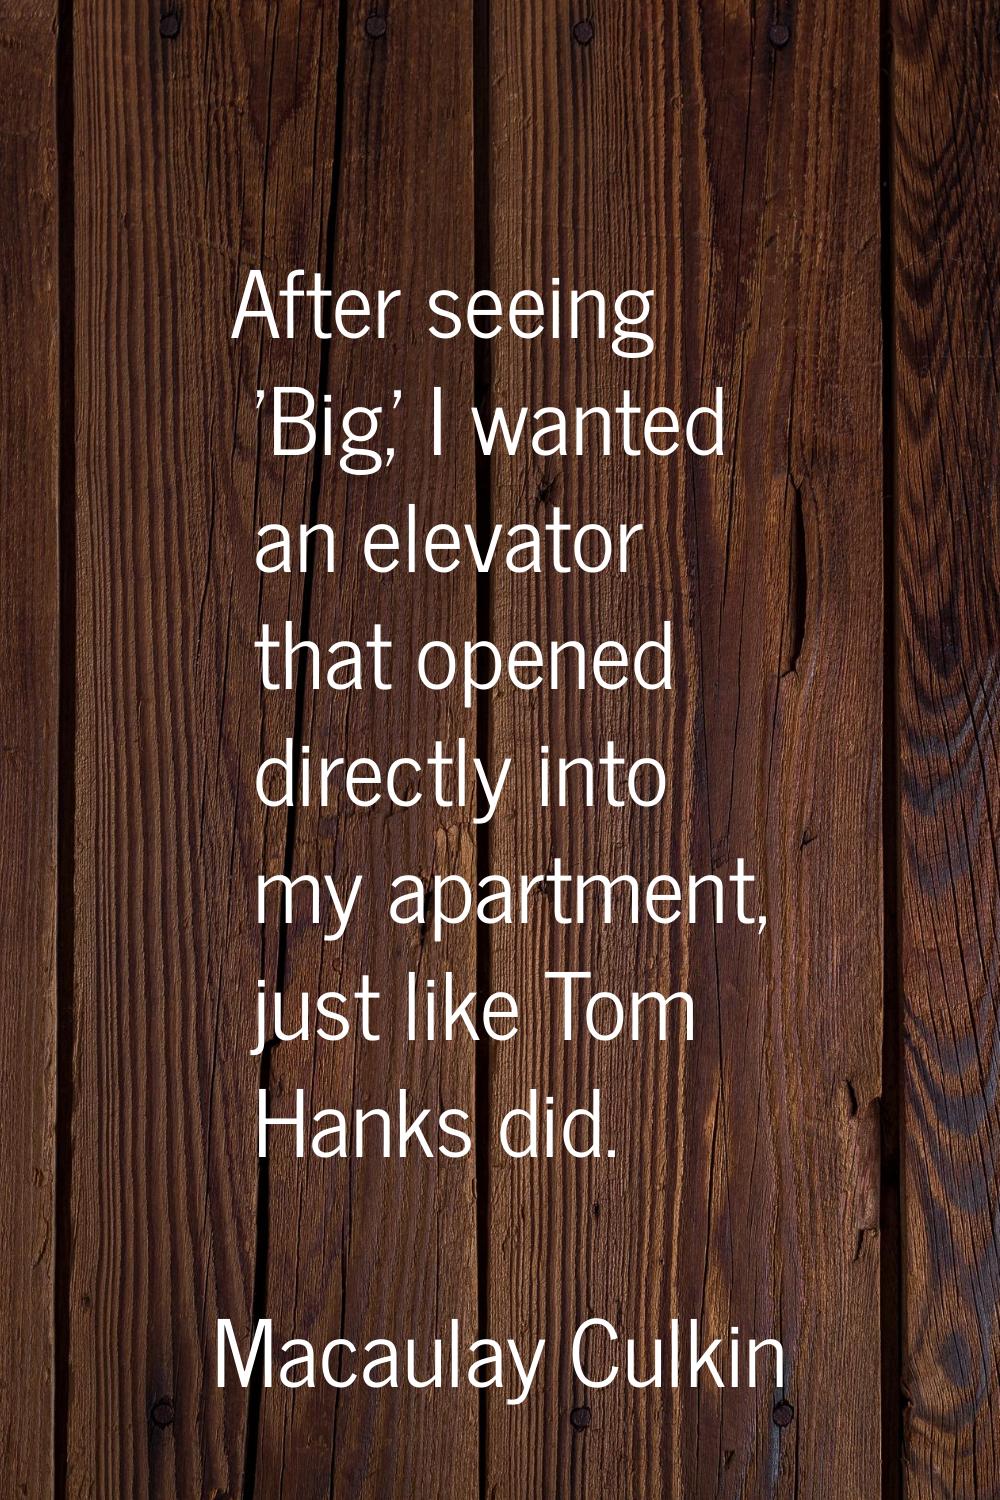 After seeing 'Big,' I wanted an elevator that opened directly into my apartment, just like Tom Hank